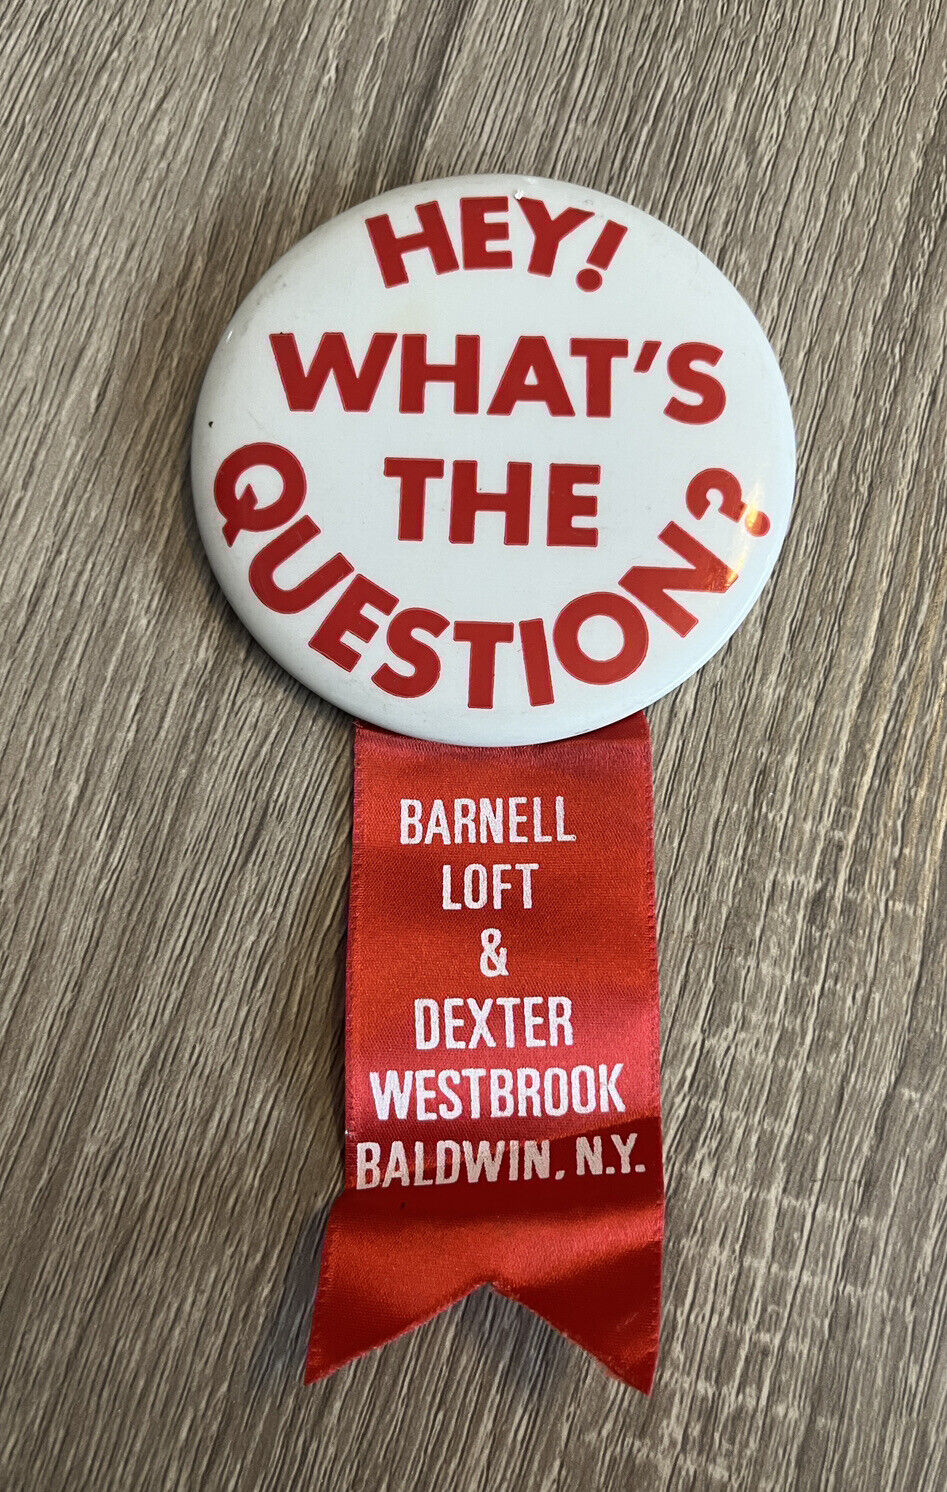 Vtg Pin Button Barnell Loft Dexter Westbrook Baldwin NY Hey What’s The Question?